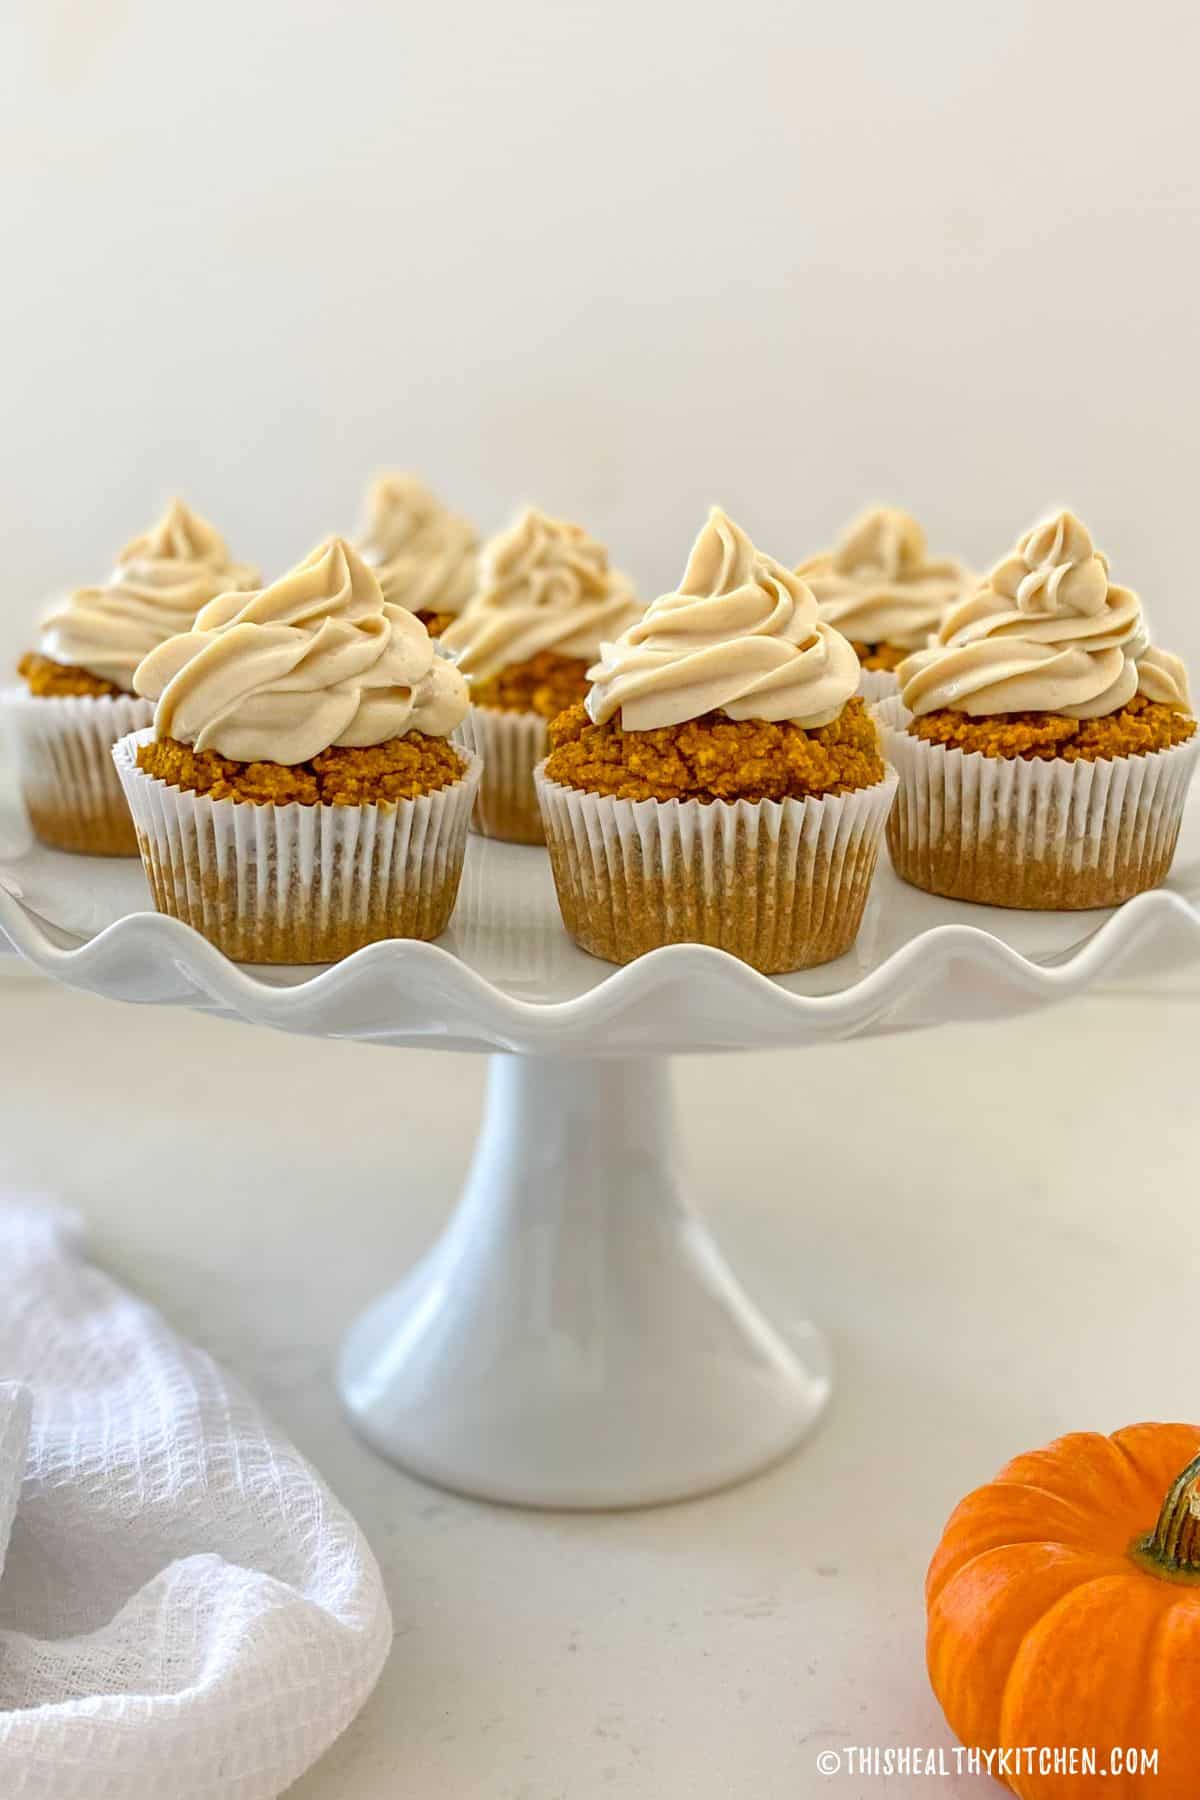 Side view of pumpkin cupcakes on cake plate.